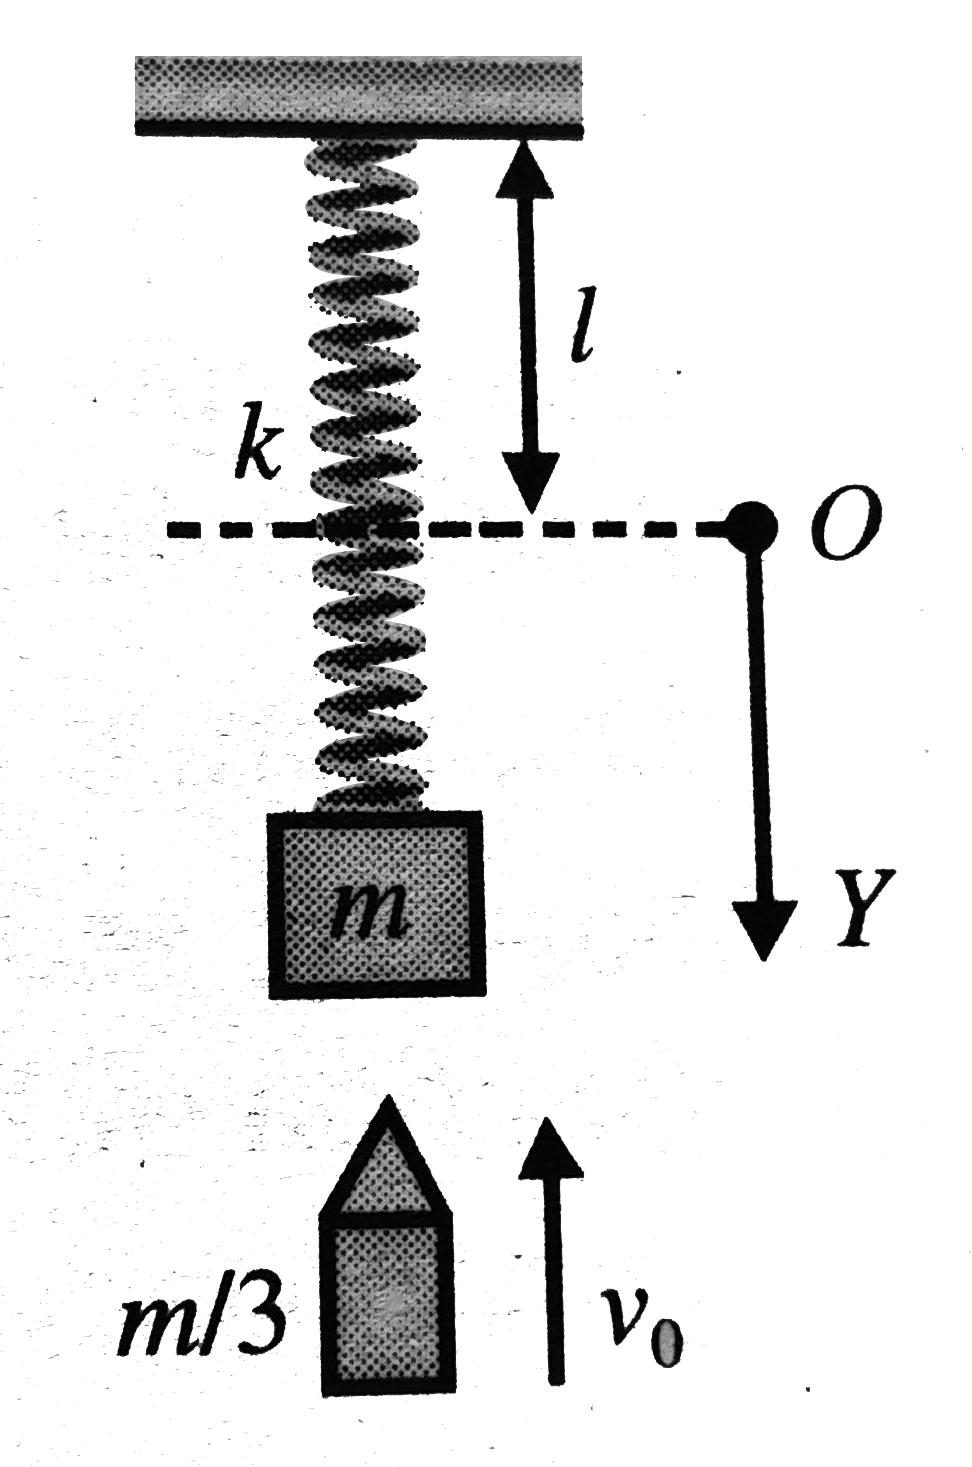 A block of mass m is suspended from one end of a light spring as shown. The origin O is considered at distance equal to natural length of the spring from the ceiling and vertical downwards direction as positive y-axis. When the system is in equilibrium a bullet of mass (m)/(3) moving in vertical up wards direction with velocity v0 strikes the block and embeds into it. As a result, the block (with bullet embedded into it) moves up and start oscillating. Based on the given information, answer the following question:   Q. Mark out the correct statements (s).